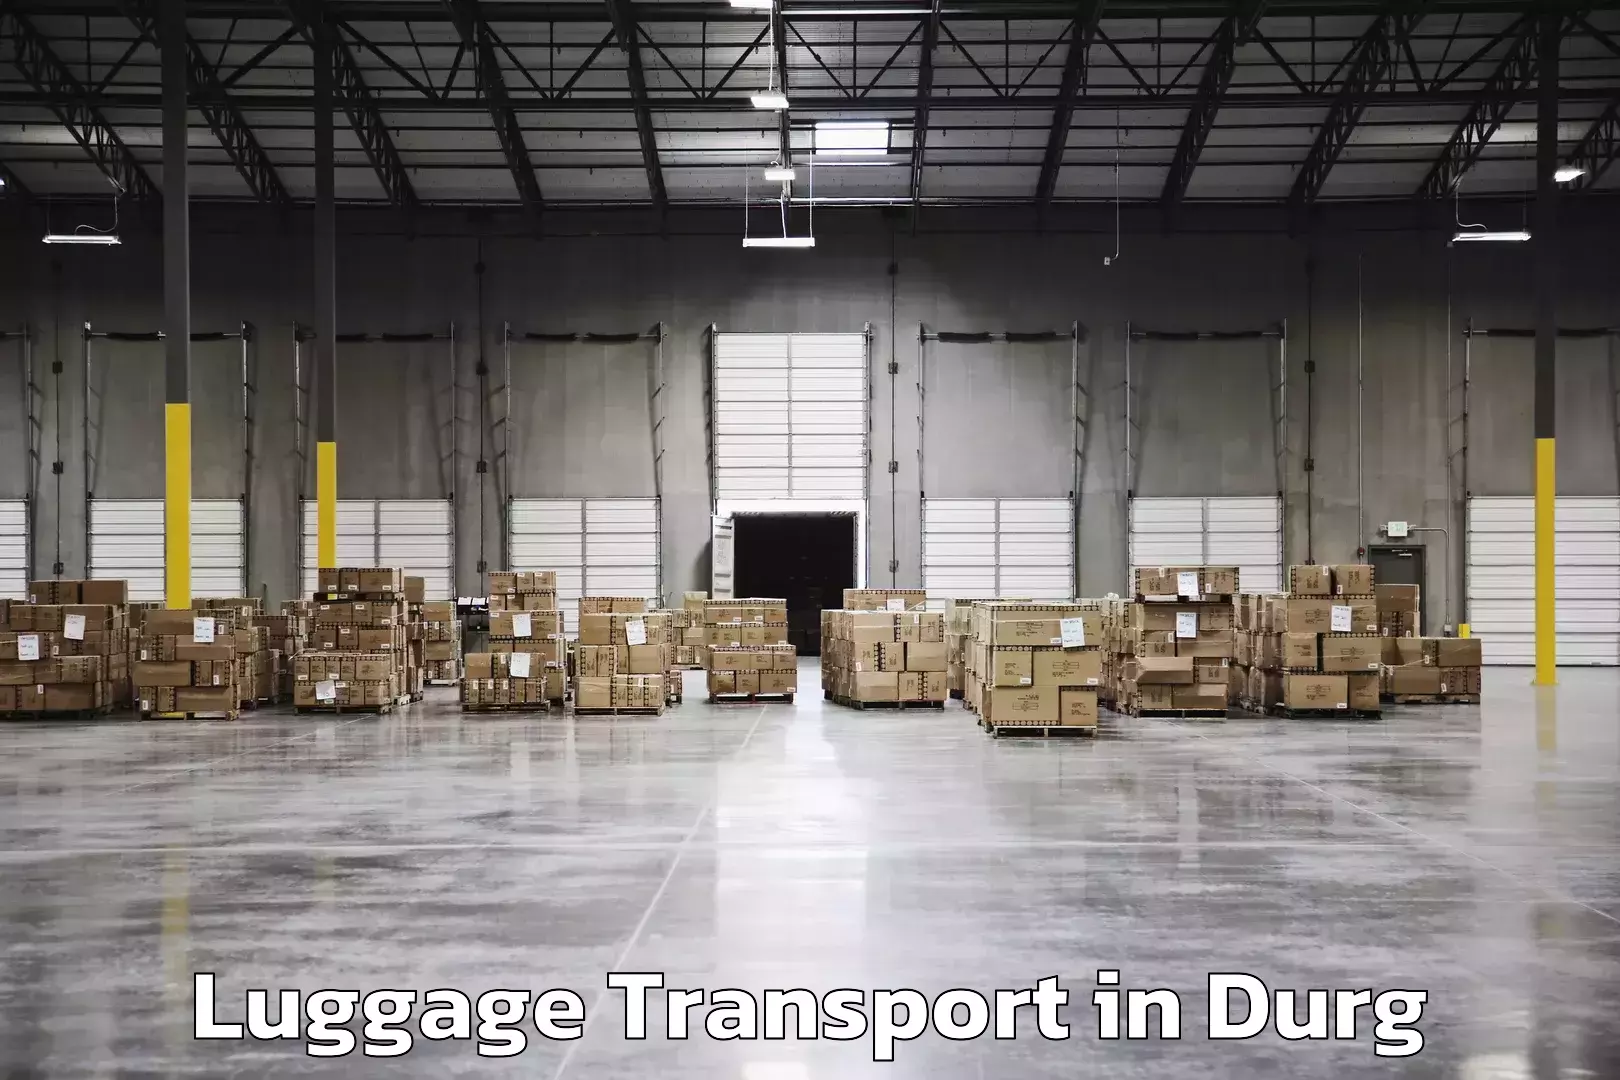 Luggage shipment processing in Durg